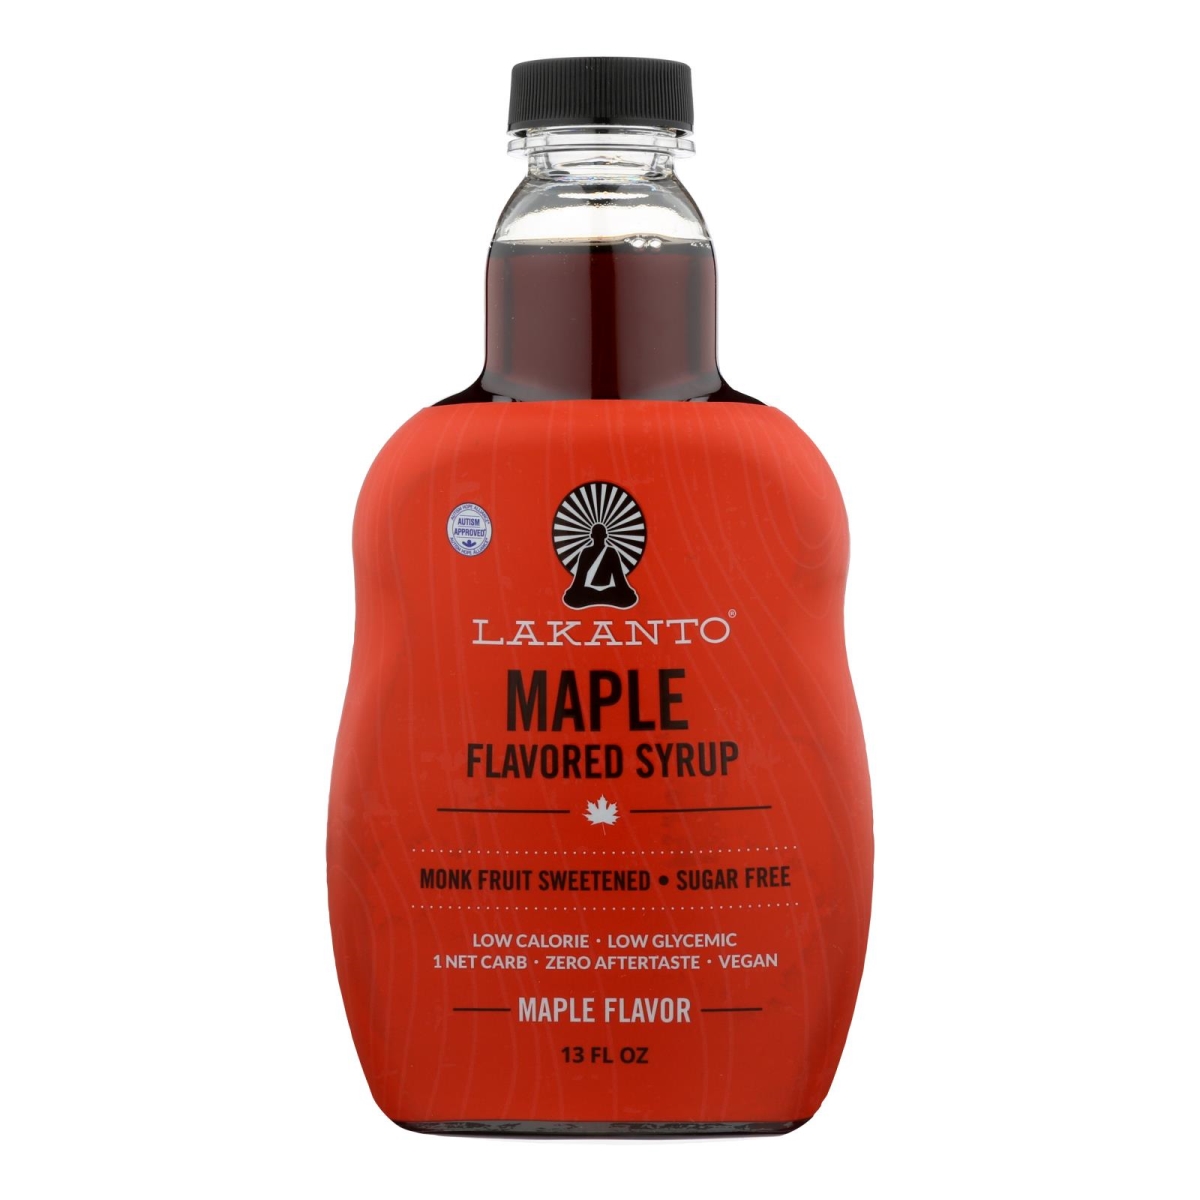 Picture of Lakanto HG2116762 13 fl oz Monk Fruit Sweetened Maple Flavored Syrup - Case of 8